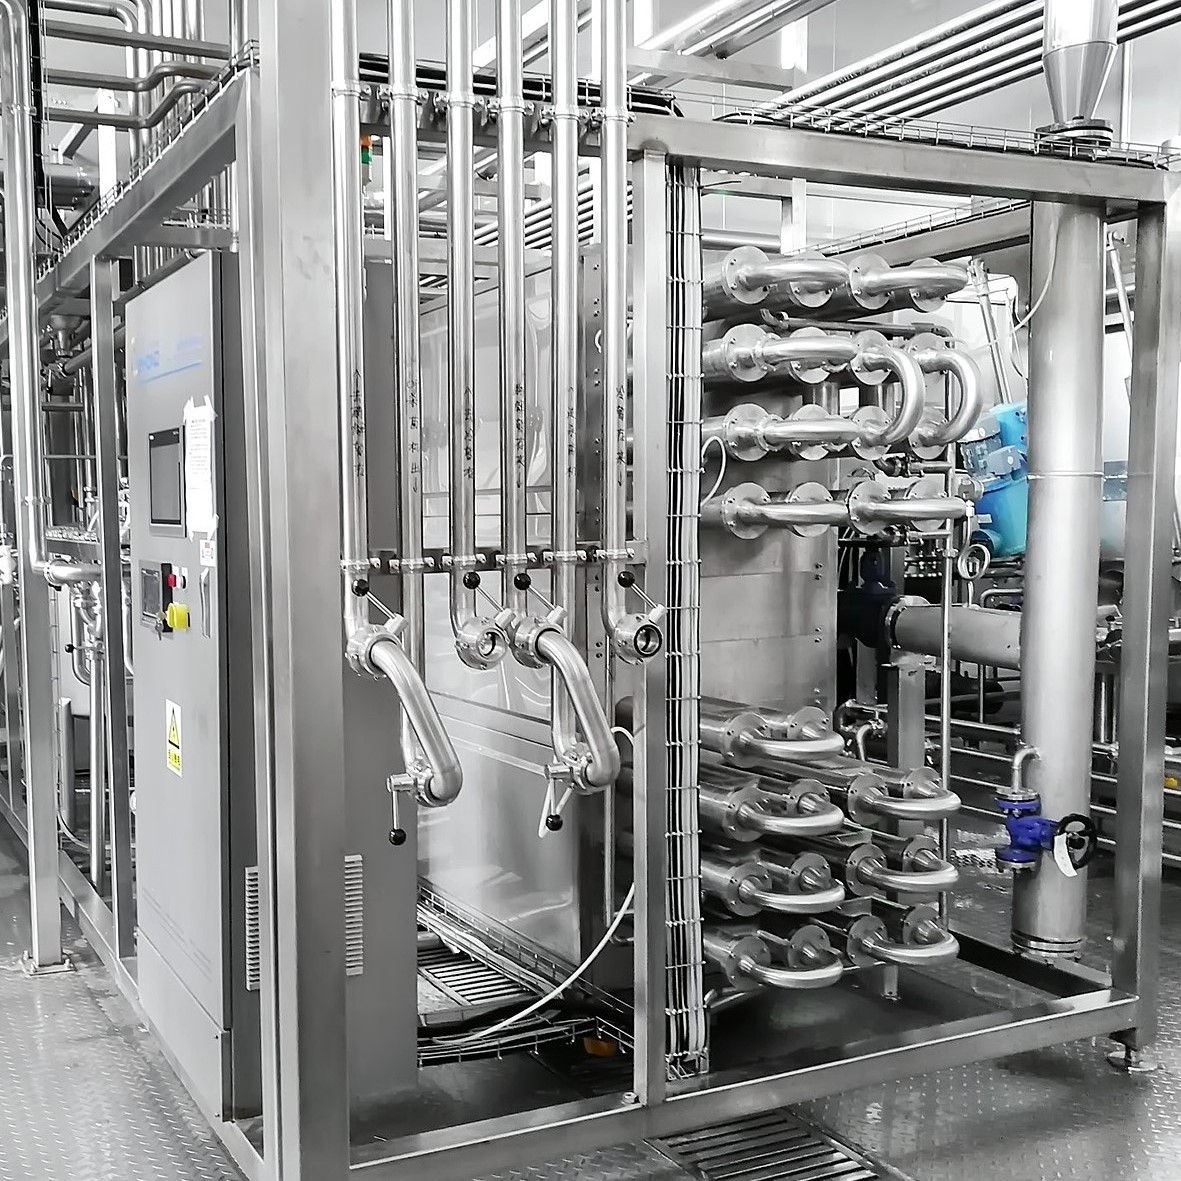 About pasteuriser,working principle of pasteurization machine